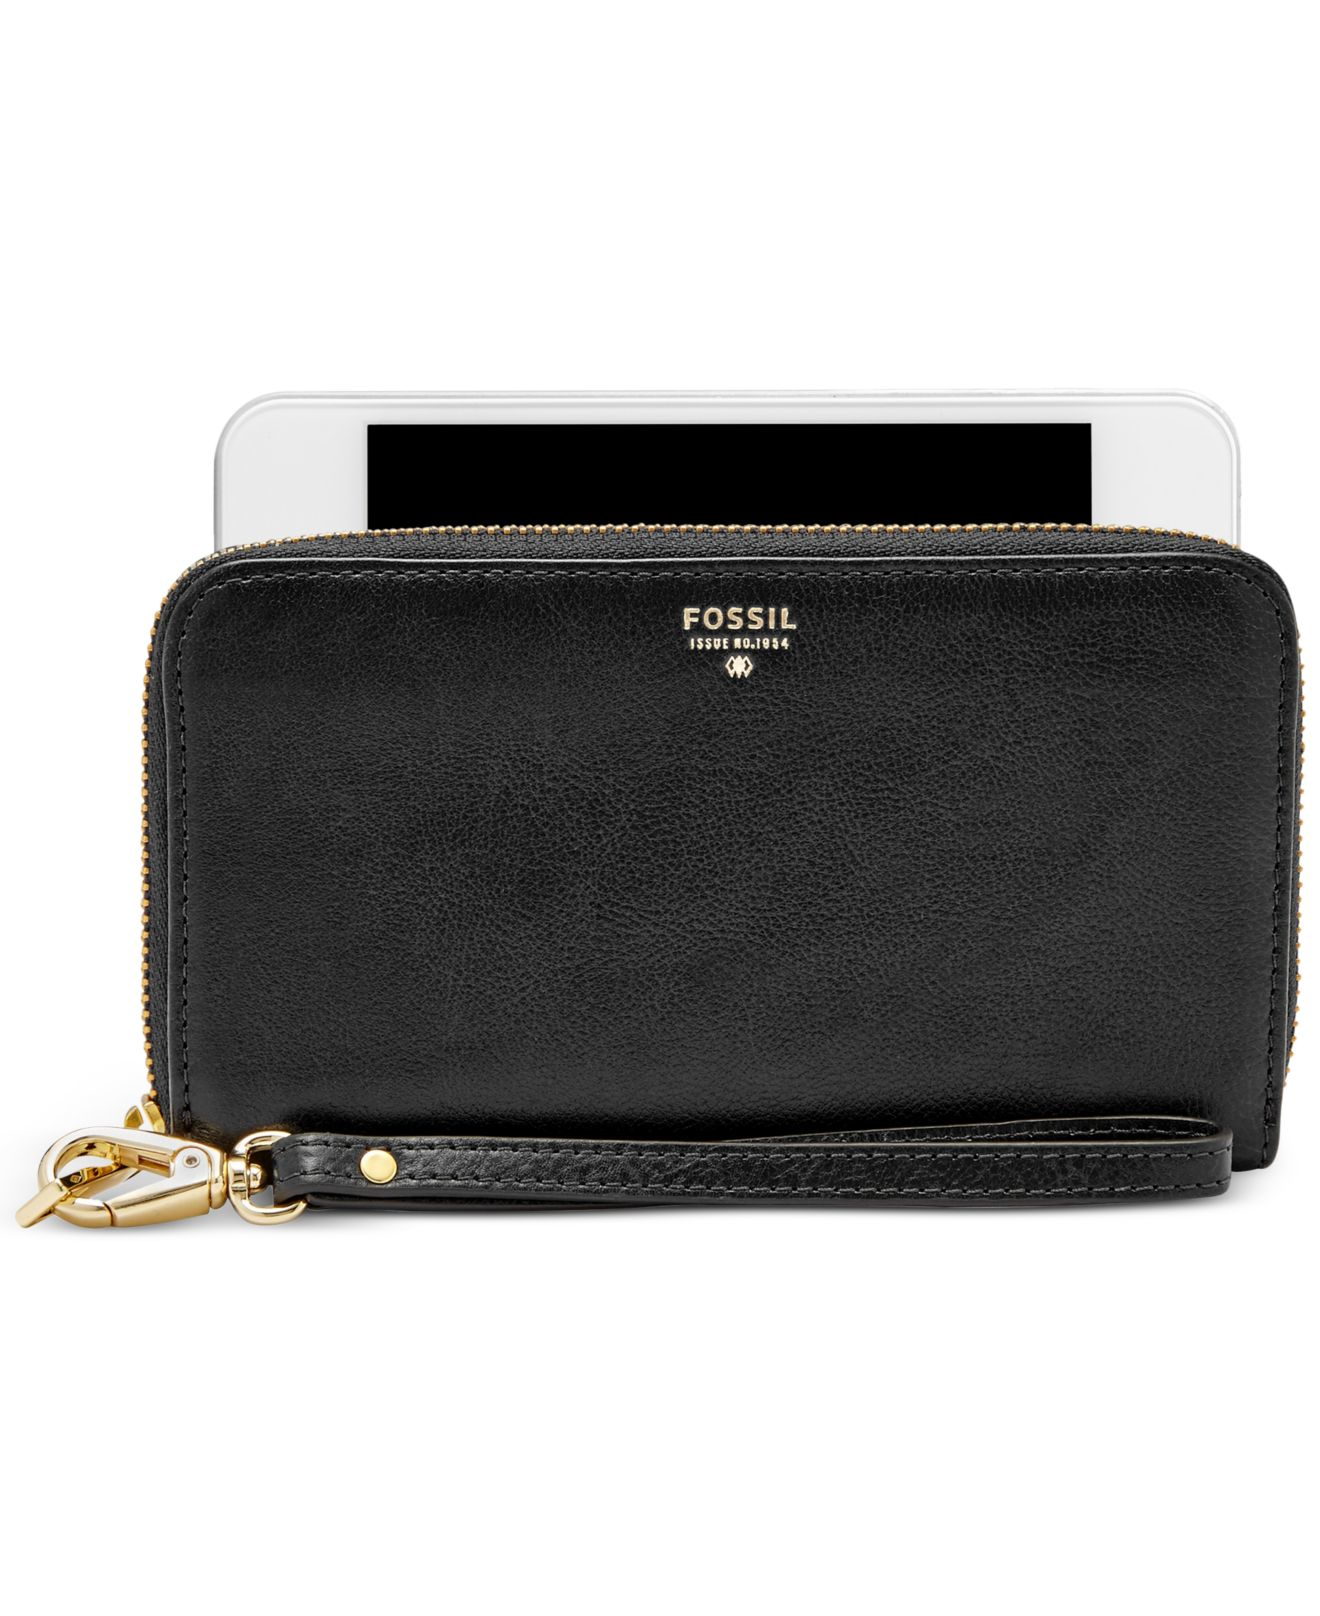 Fossil Sydney Leather Zip Phone Wallet in Black - Save 45% | Lyst